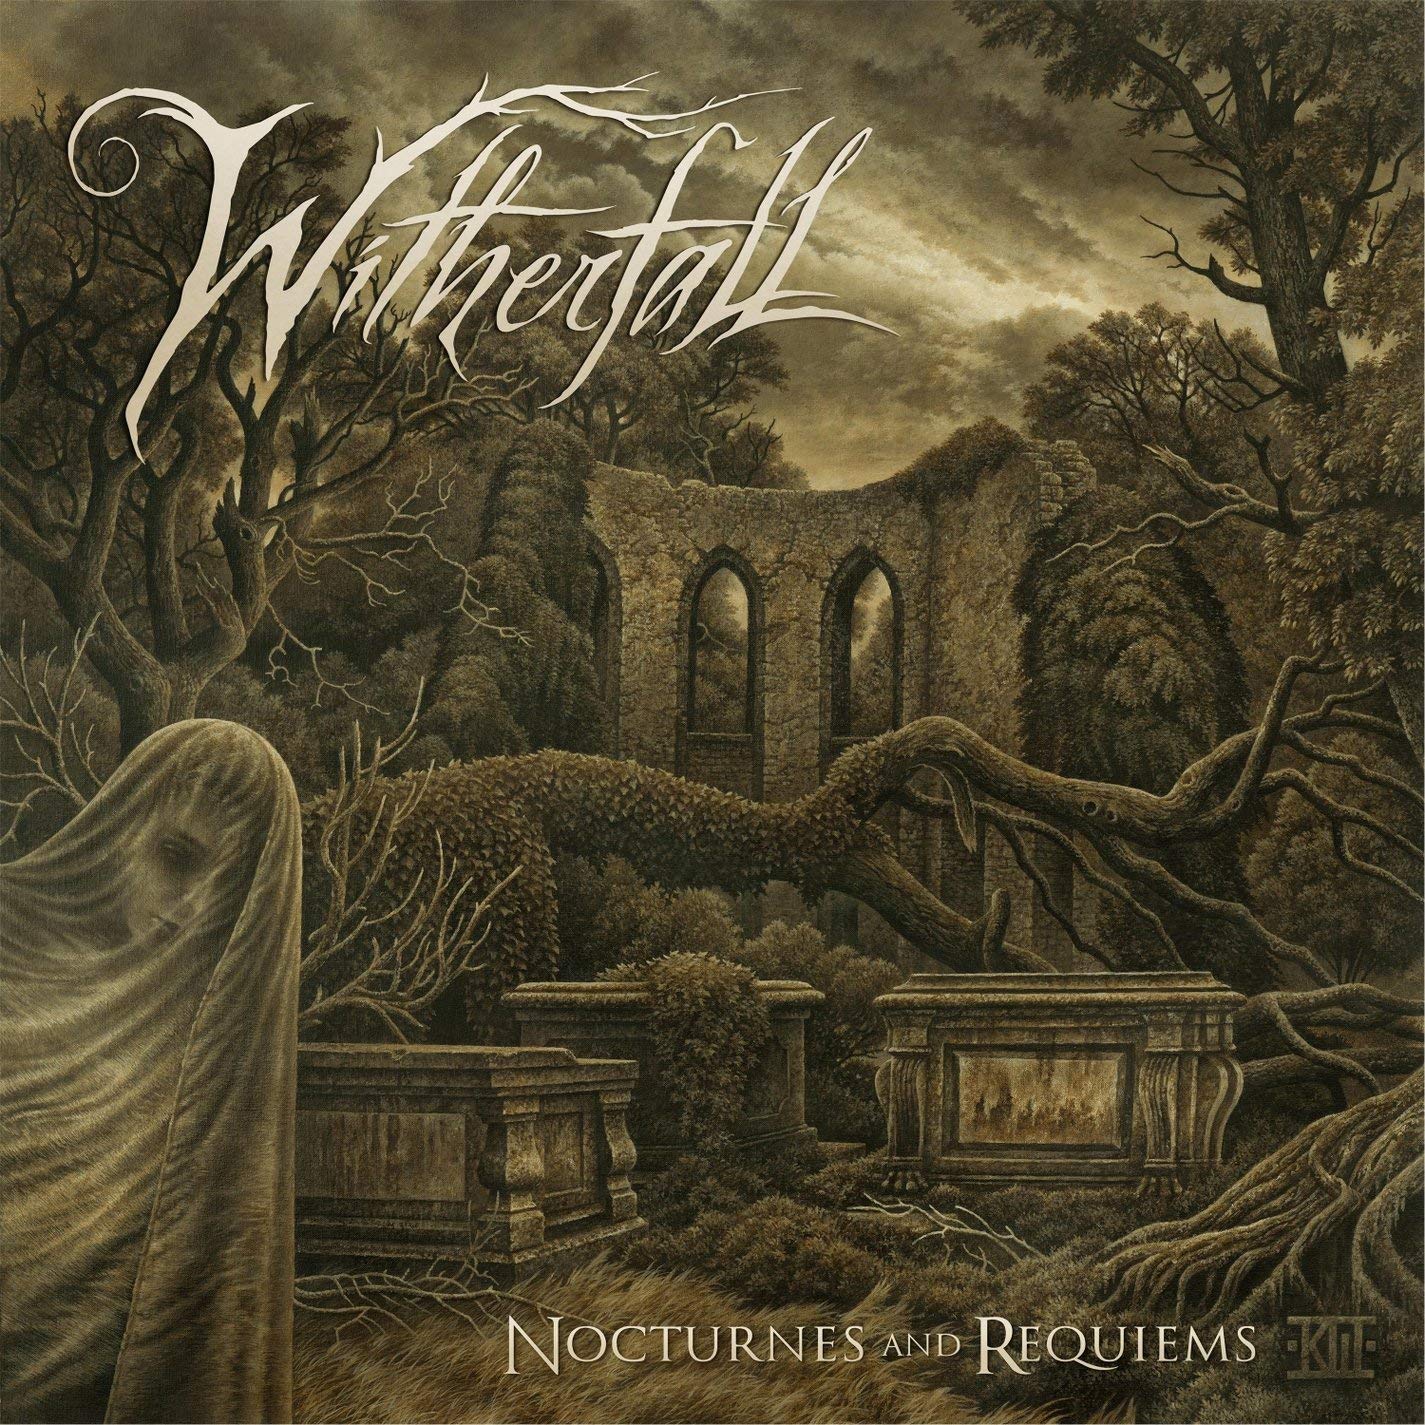 Witherfall - Nocturnes and Requiems. Deluxe 180gm Gatefold LP with Poster and CD